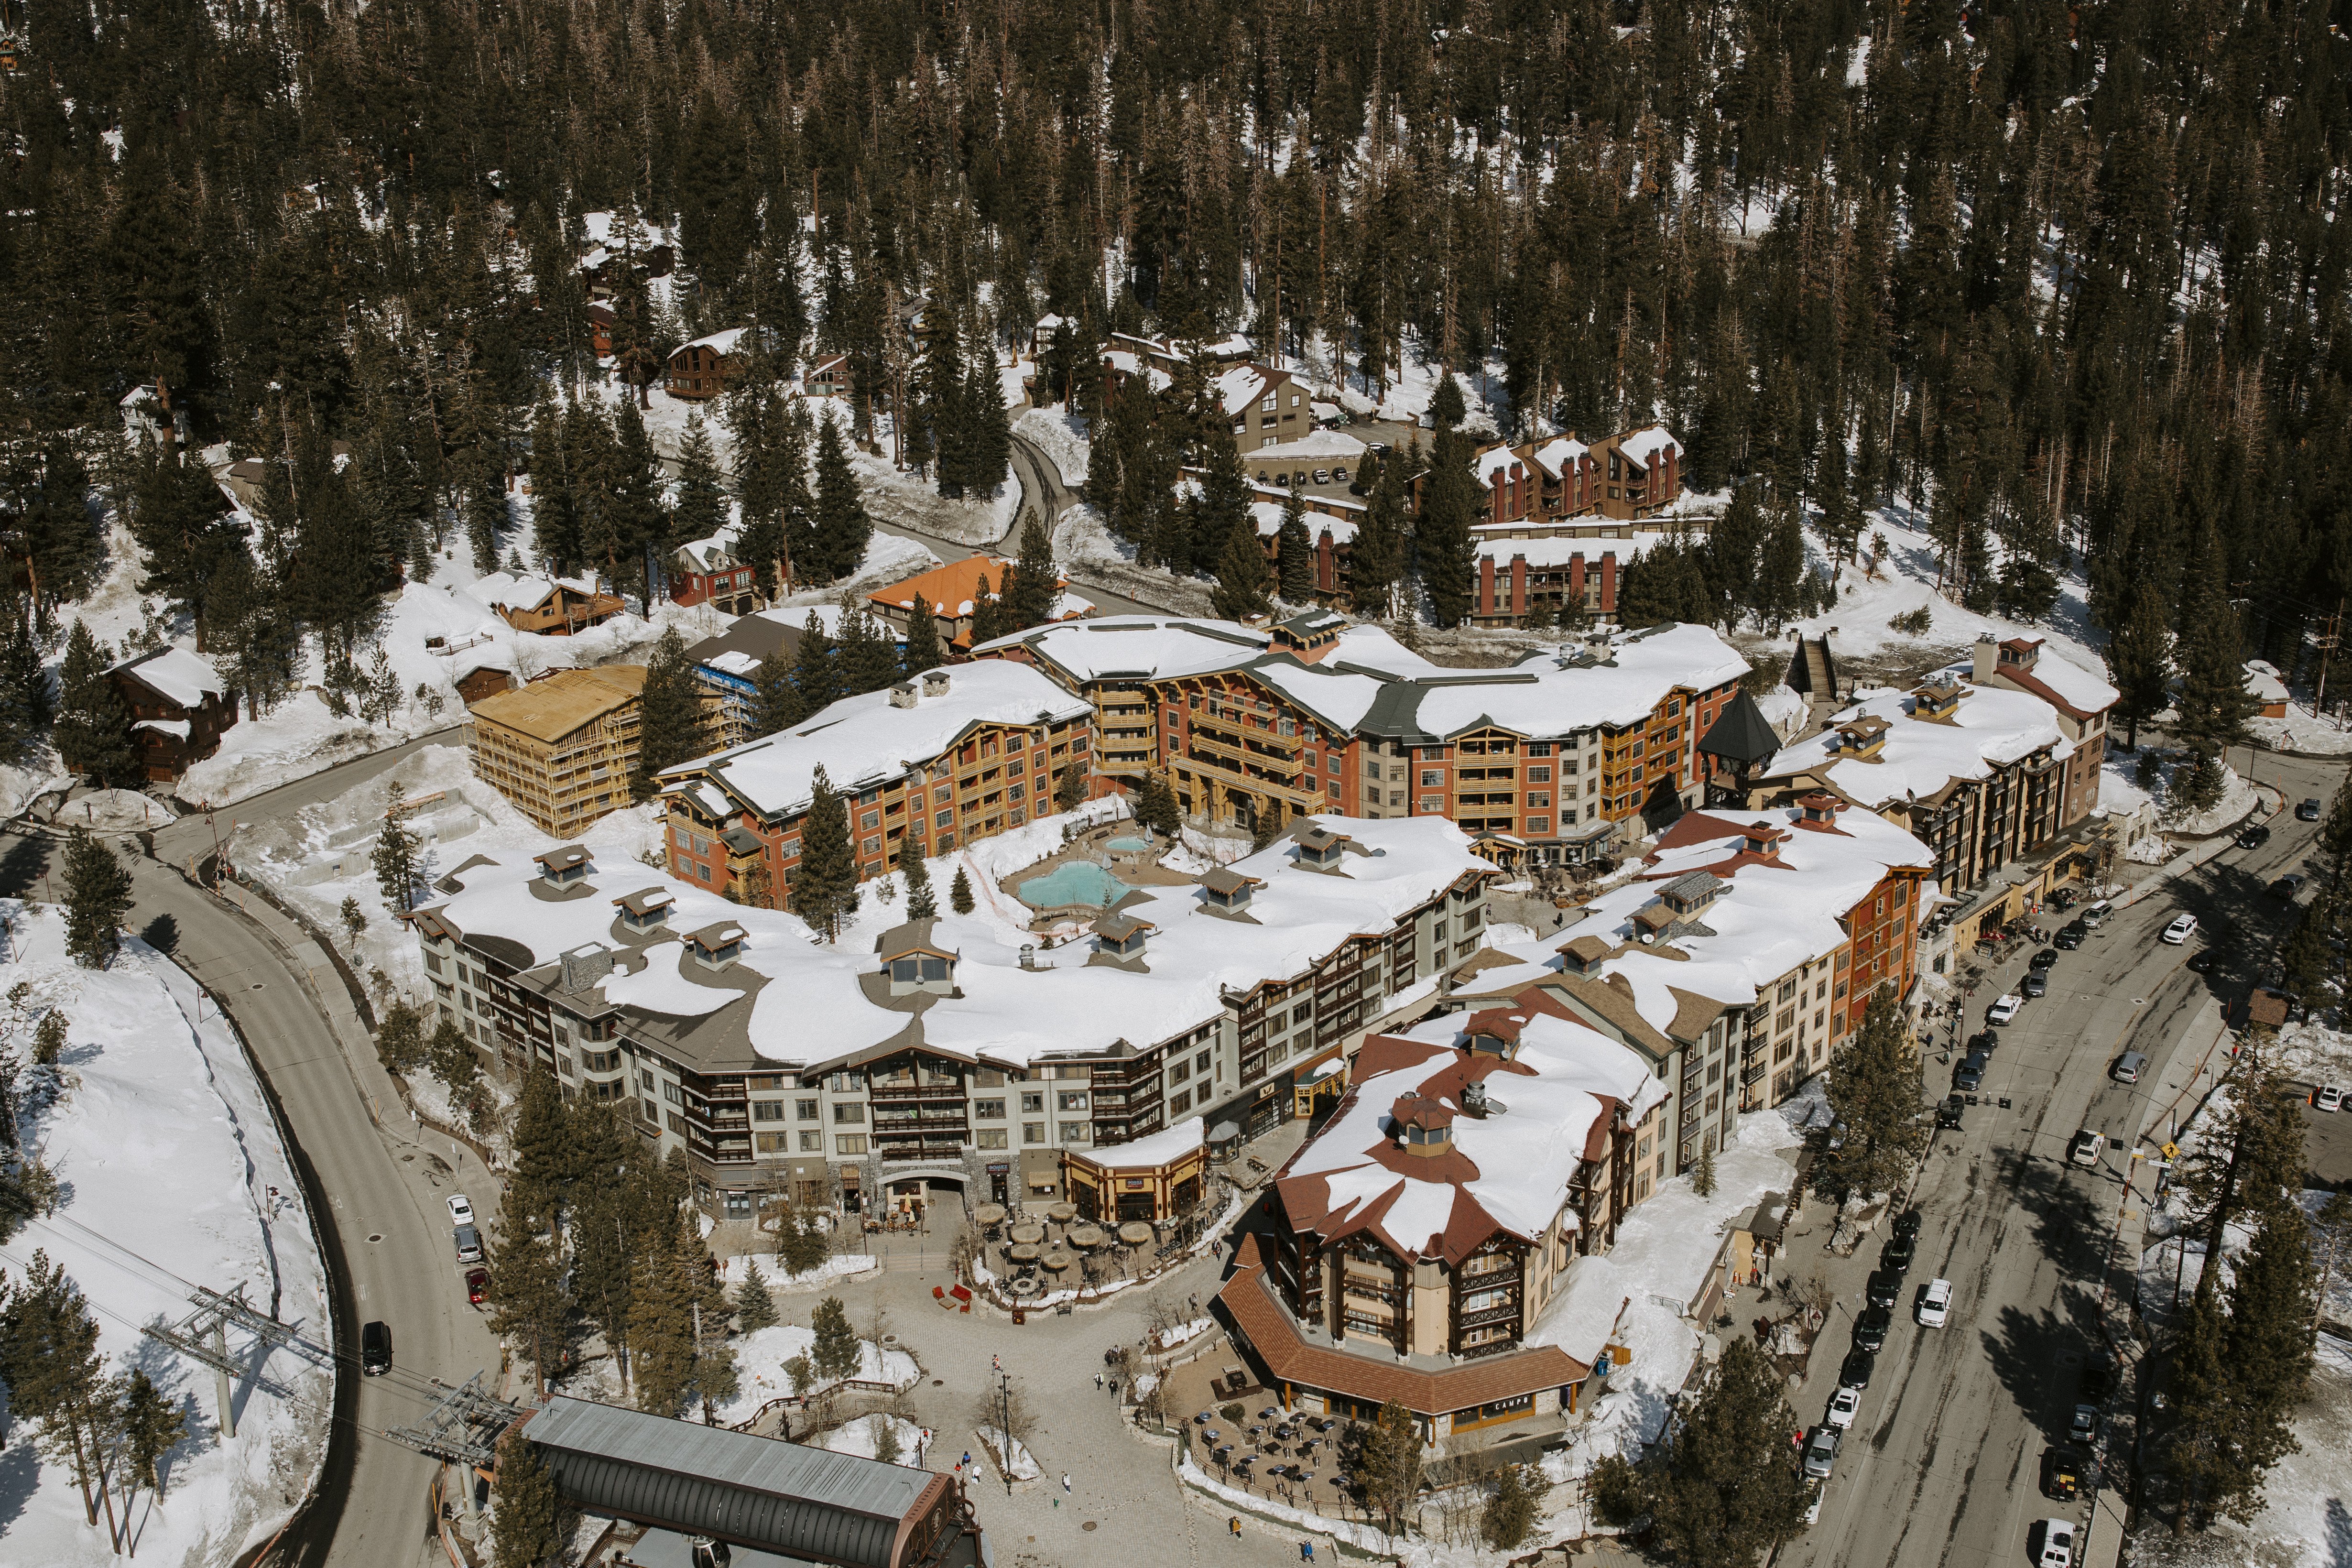 Arial view of the Village at Mammoth